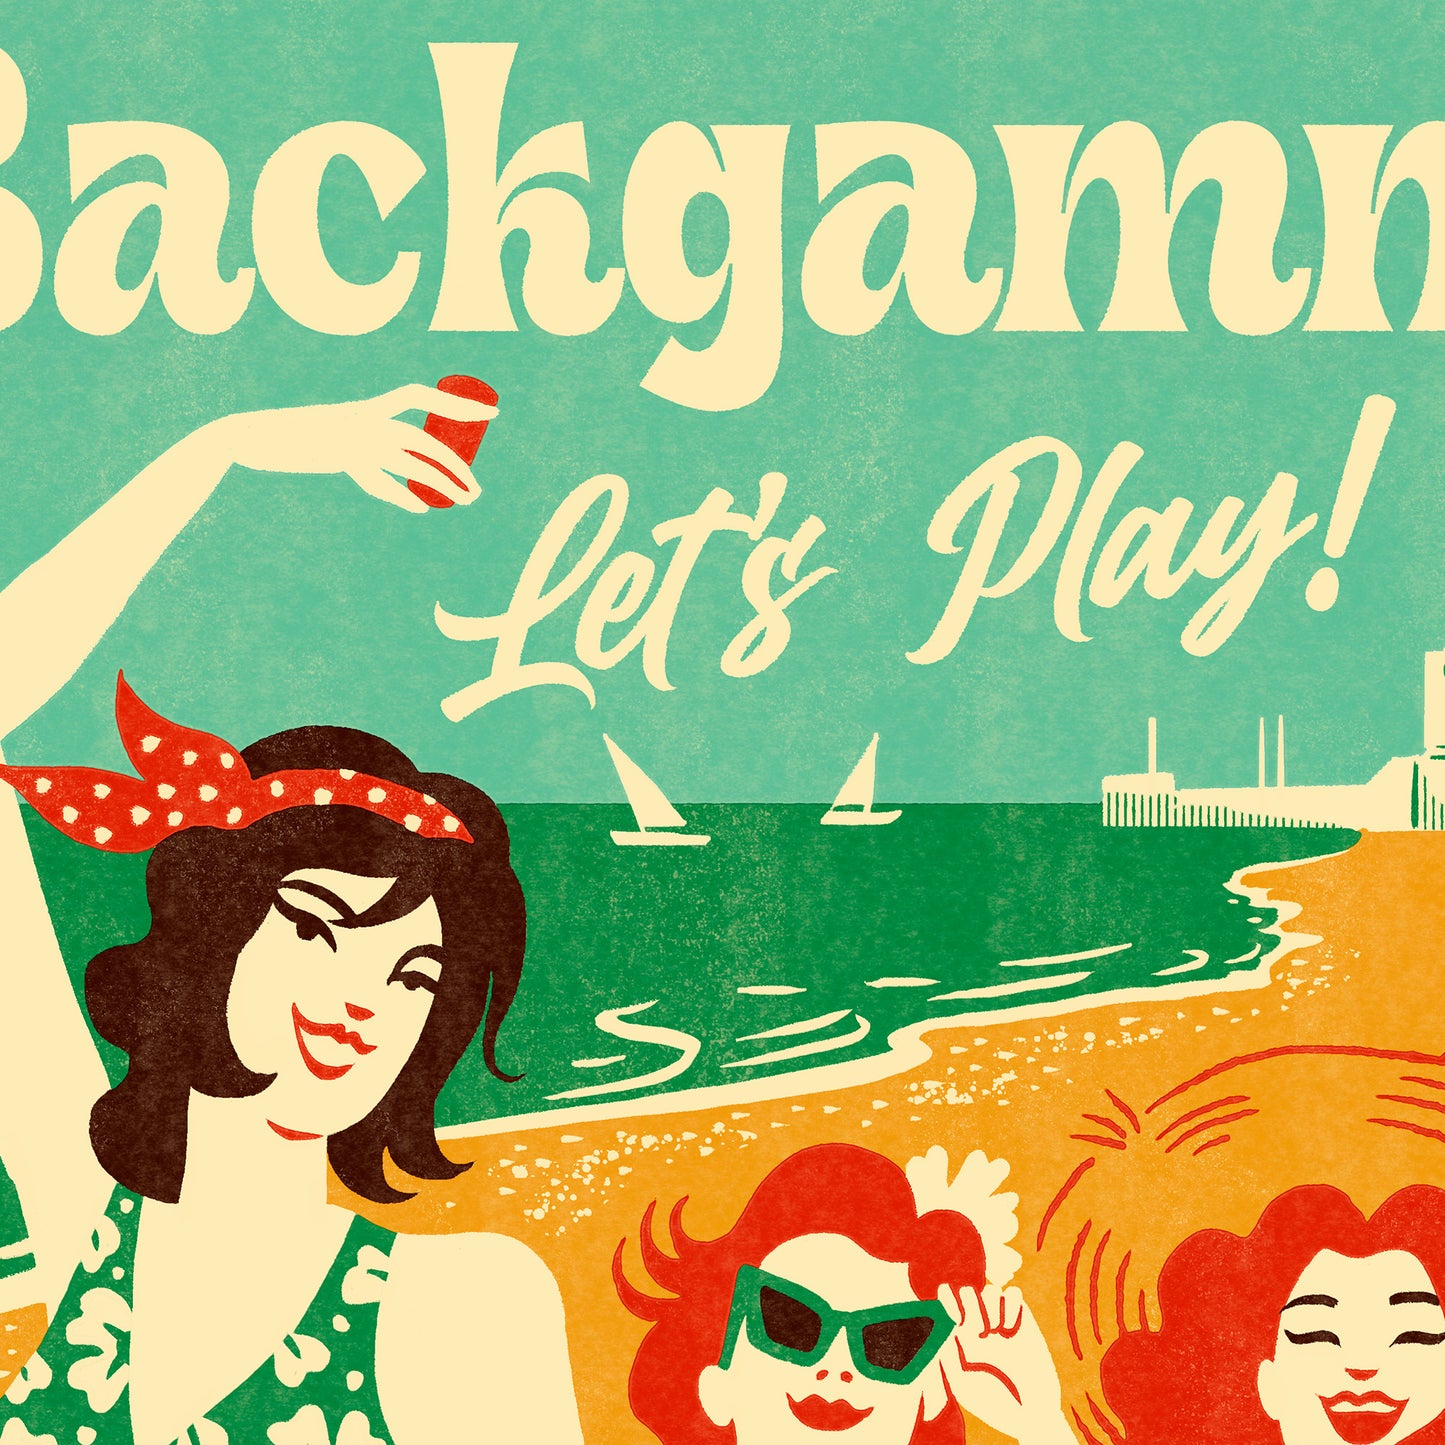 Backgammon - Let's Play!, Backgammon Poster in Vintage Style, by artist Adria Marques for Backgammon Galaxy